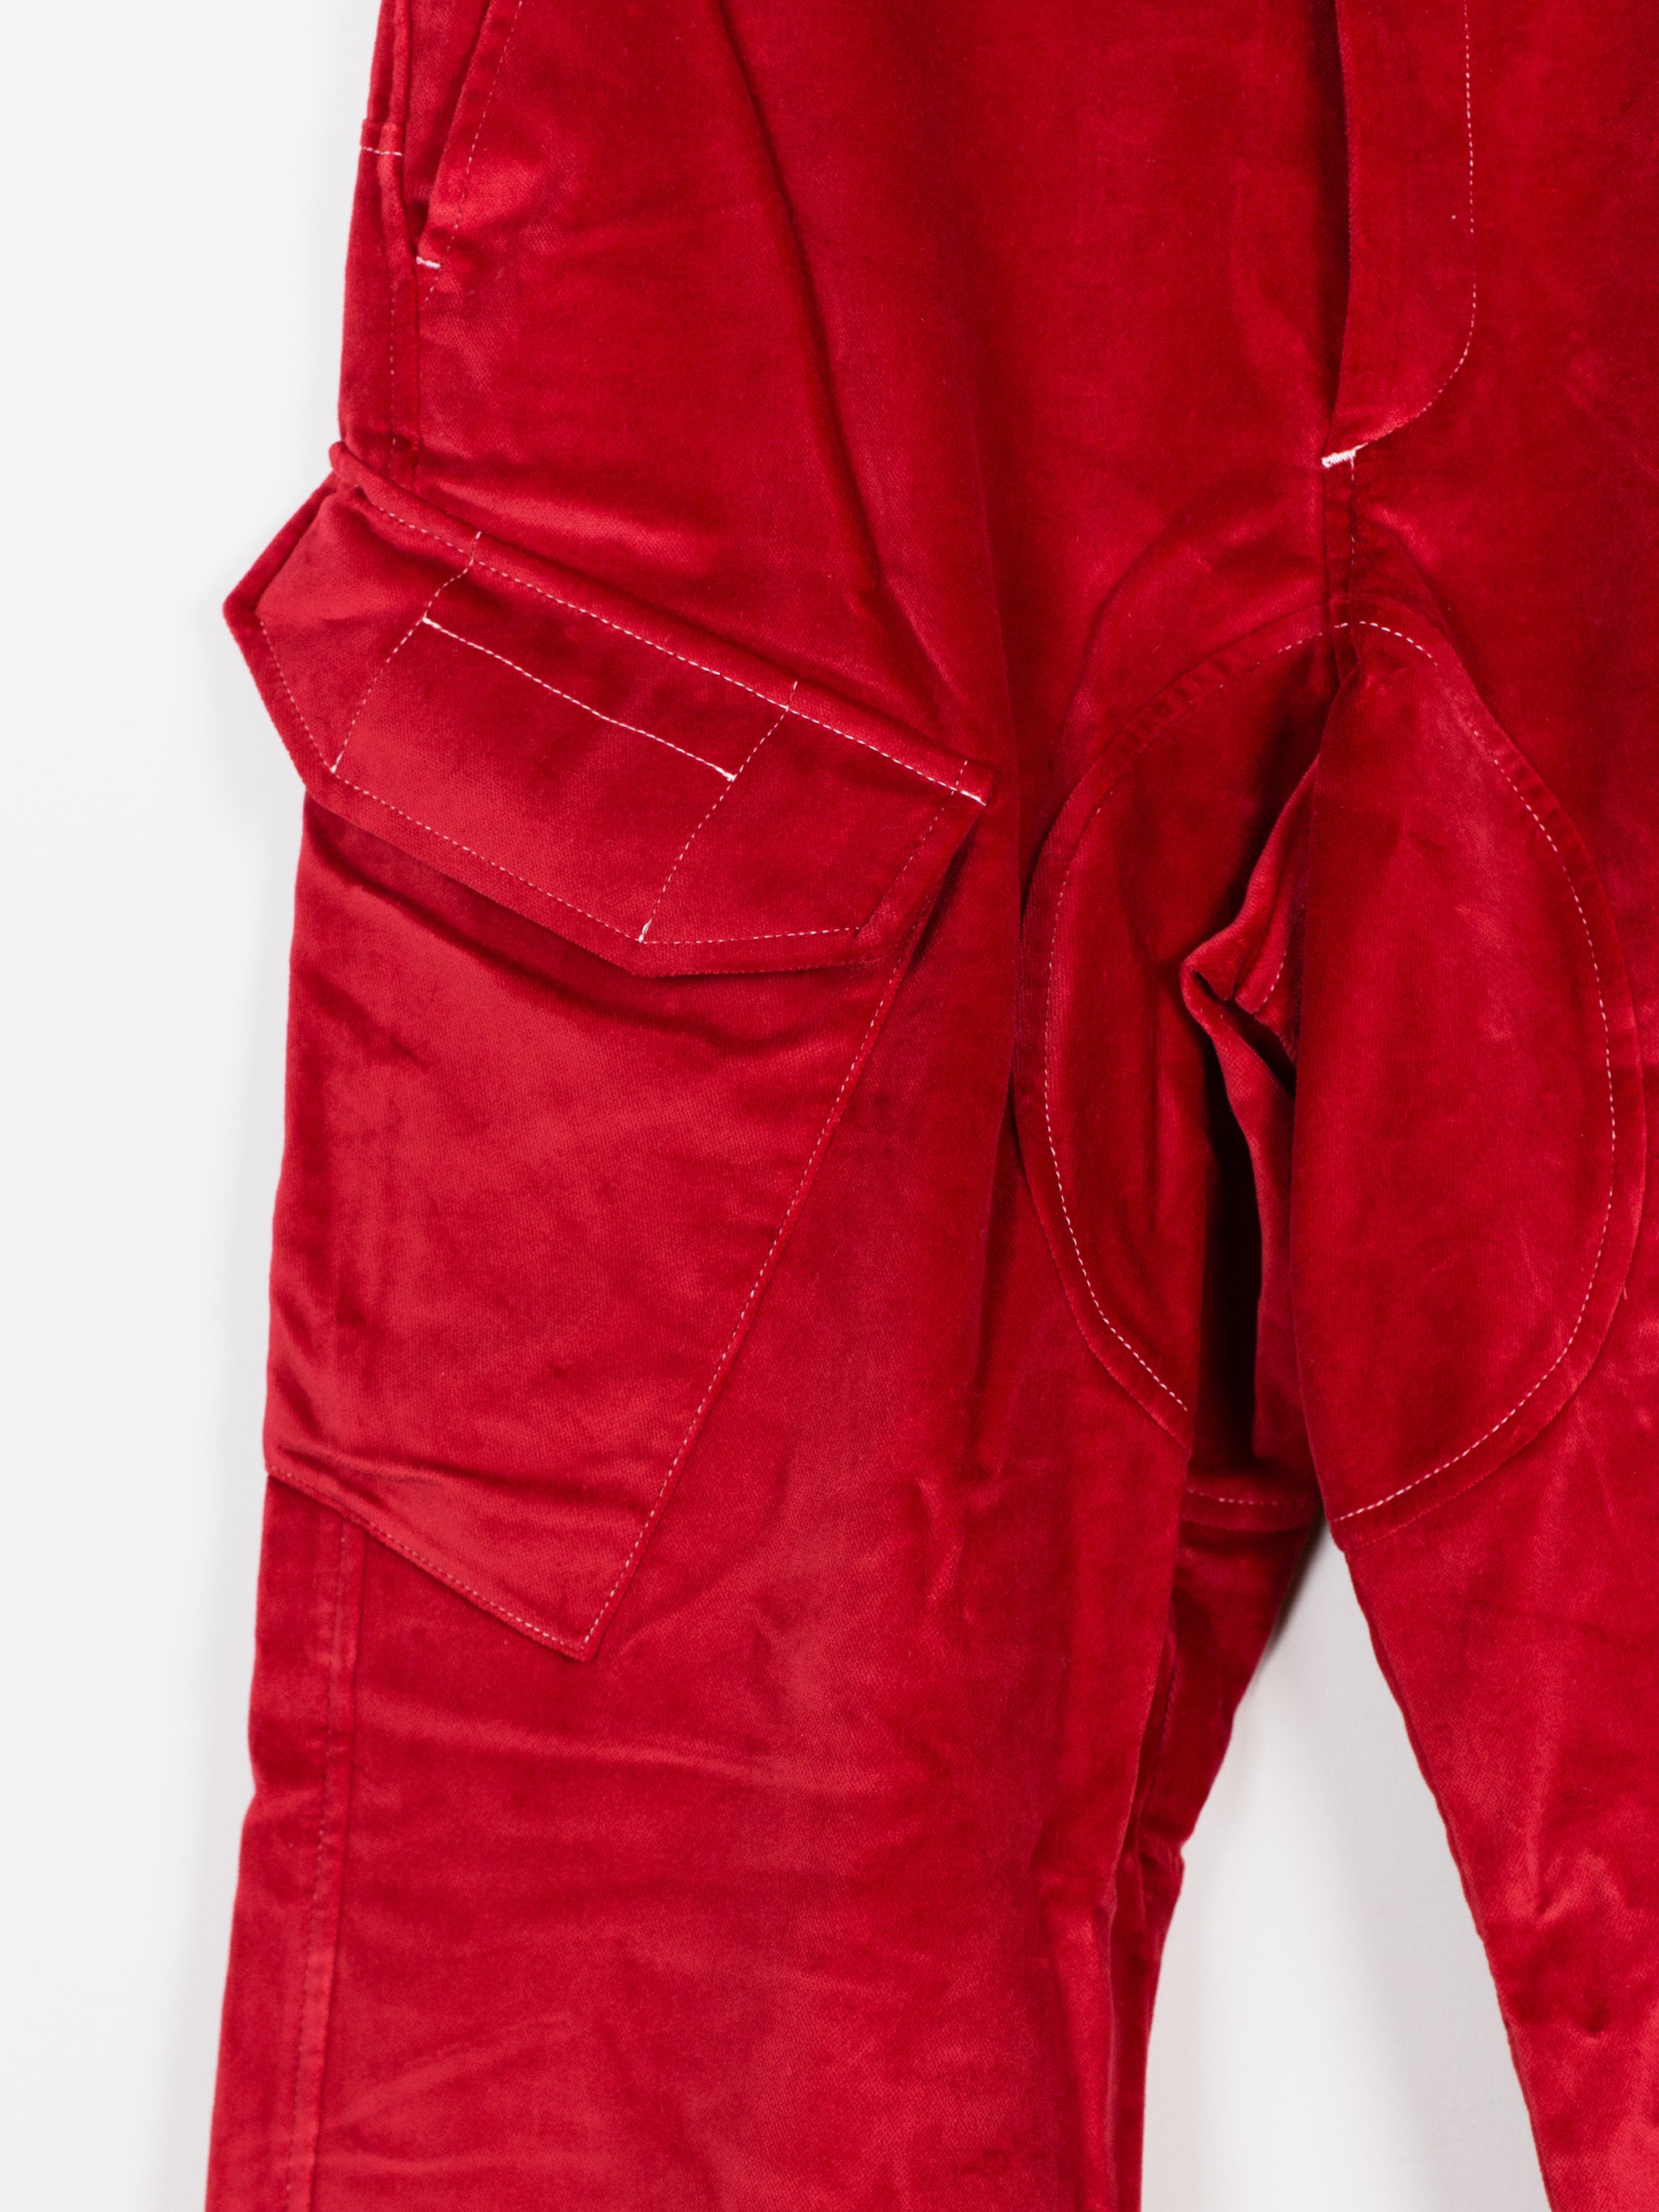 Twisted Tailor crushed velvet suit trousers in red